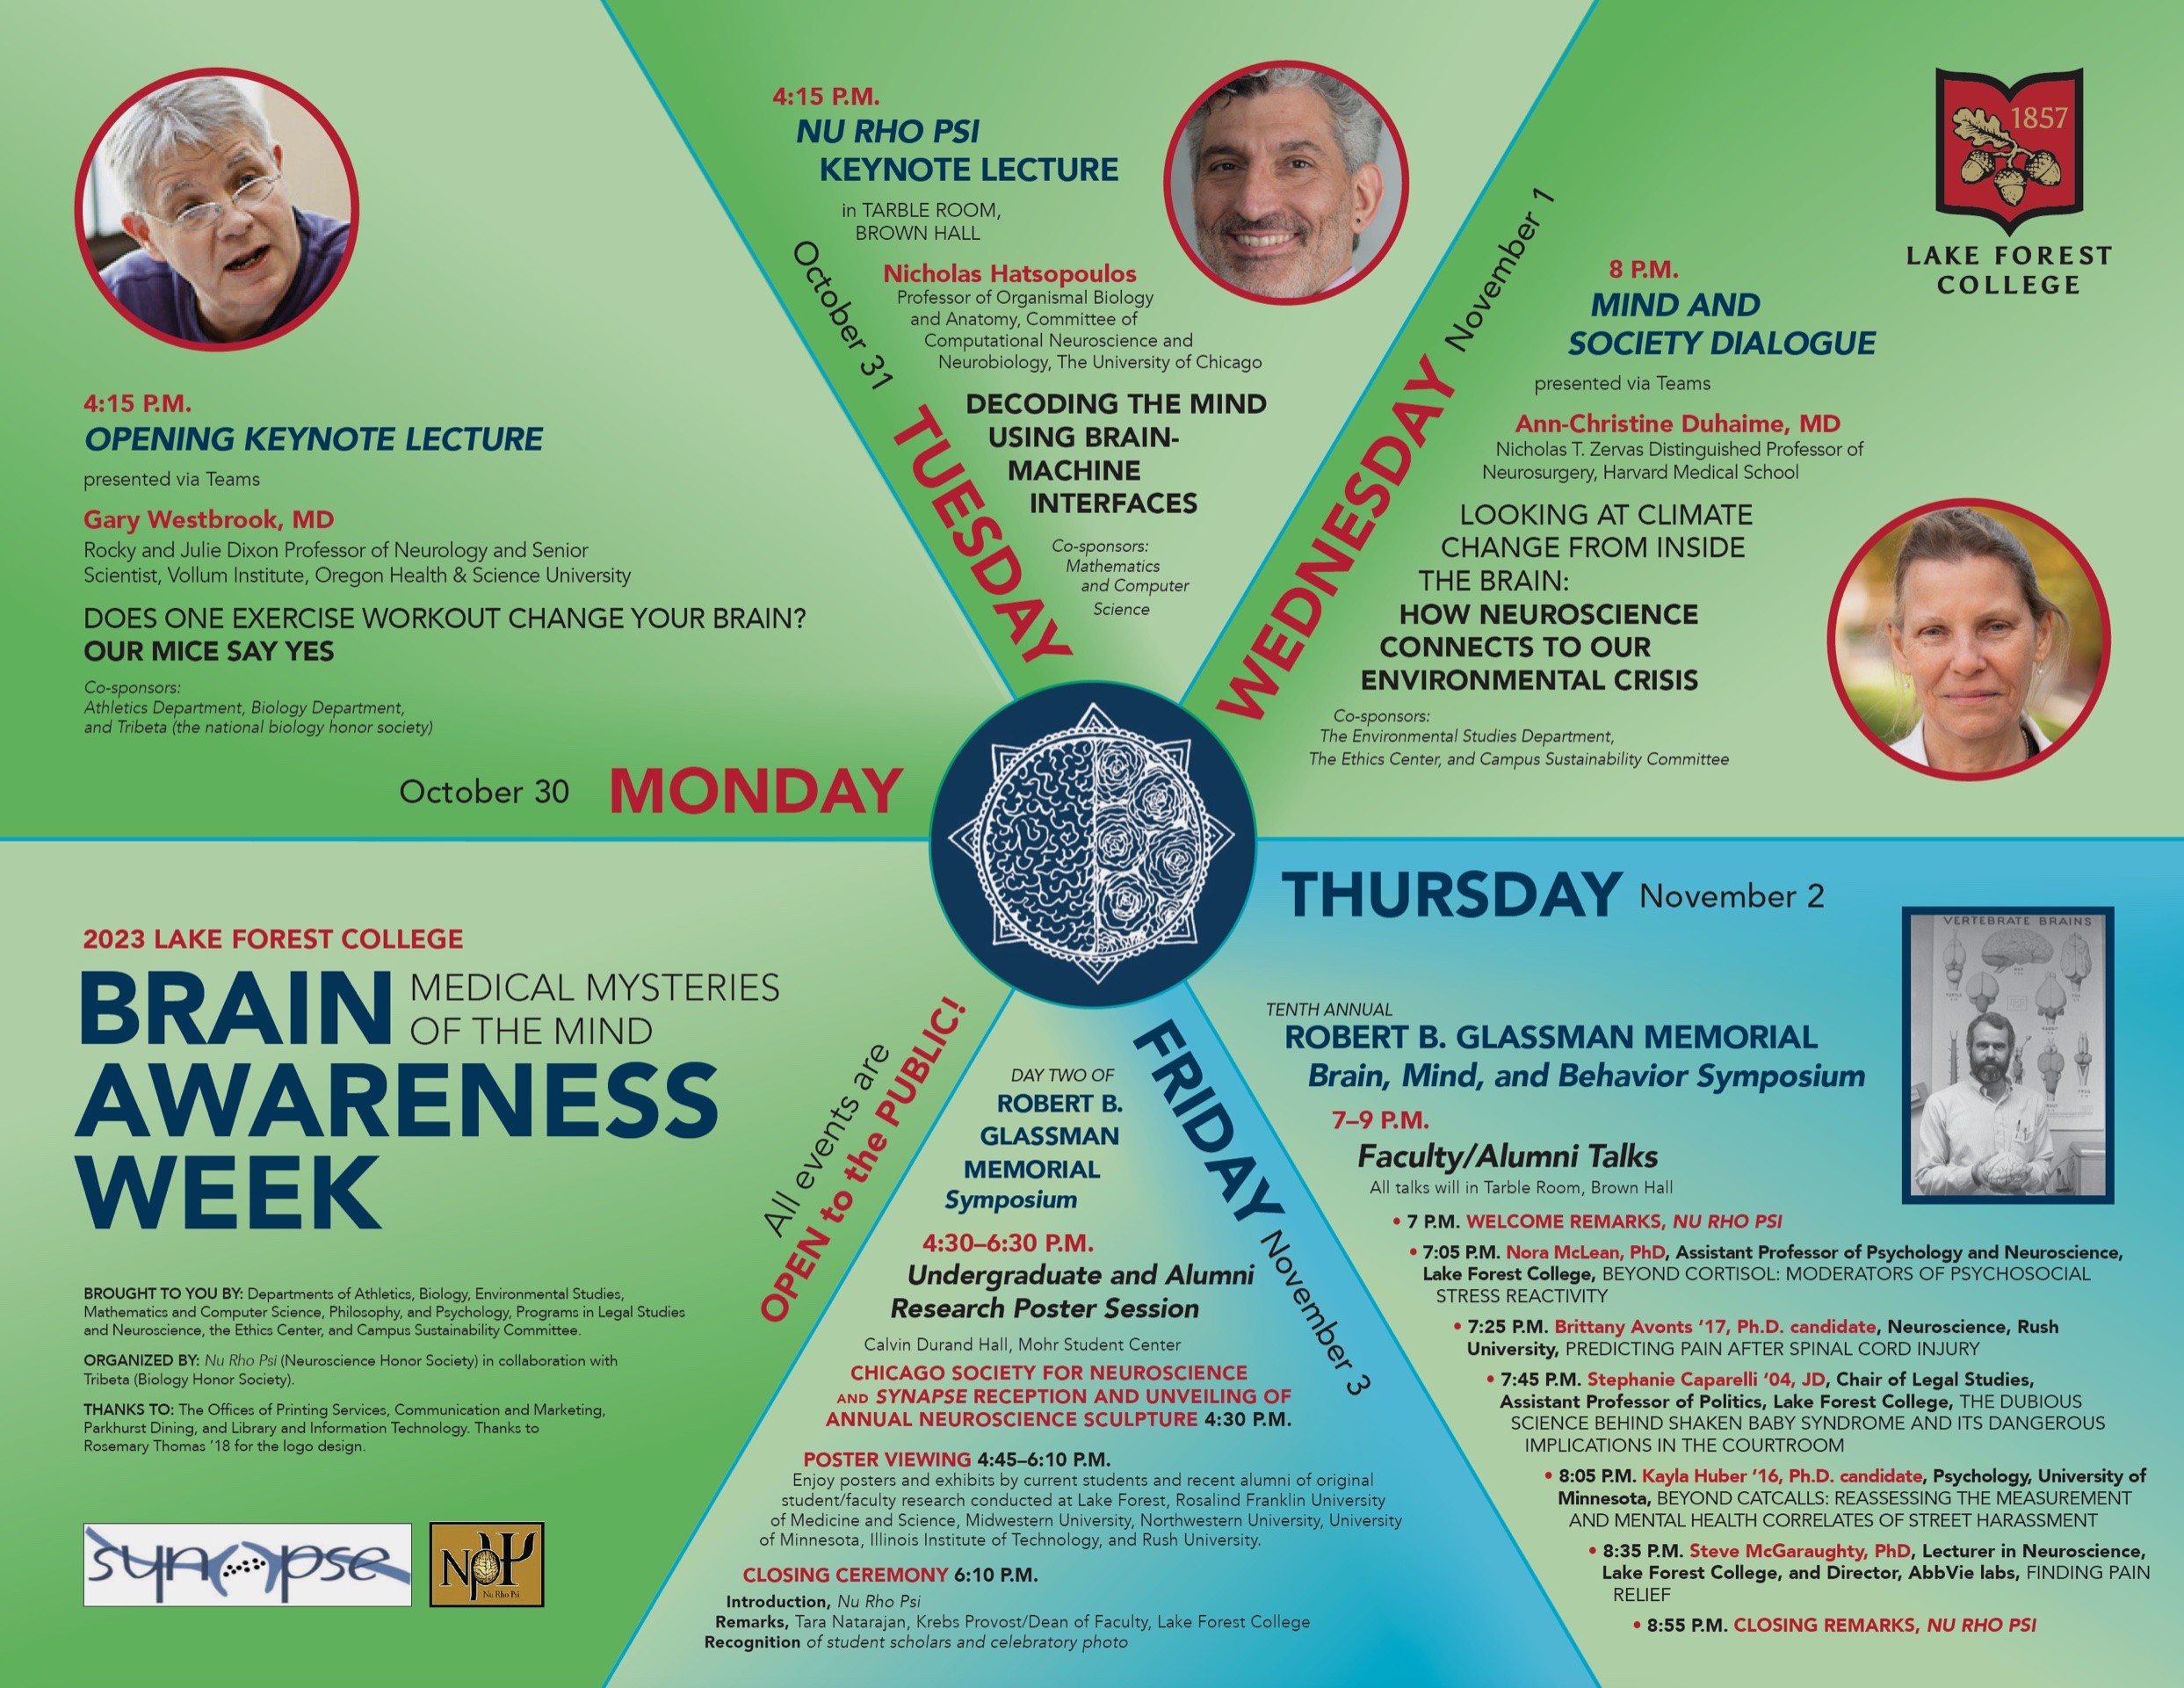 2023 Brain Awareness Week Events at Lake Forest College